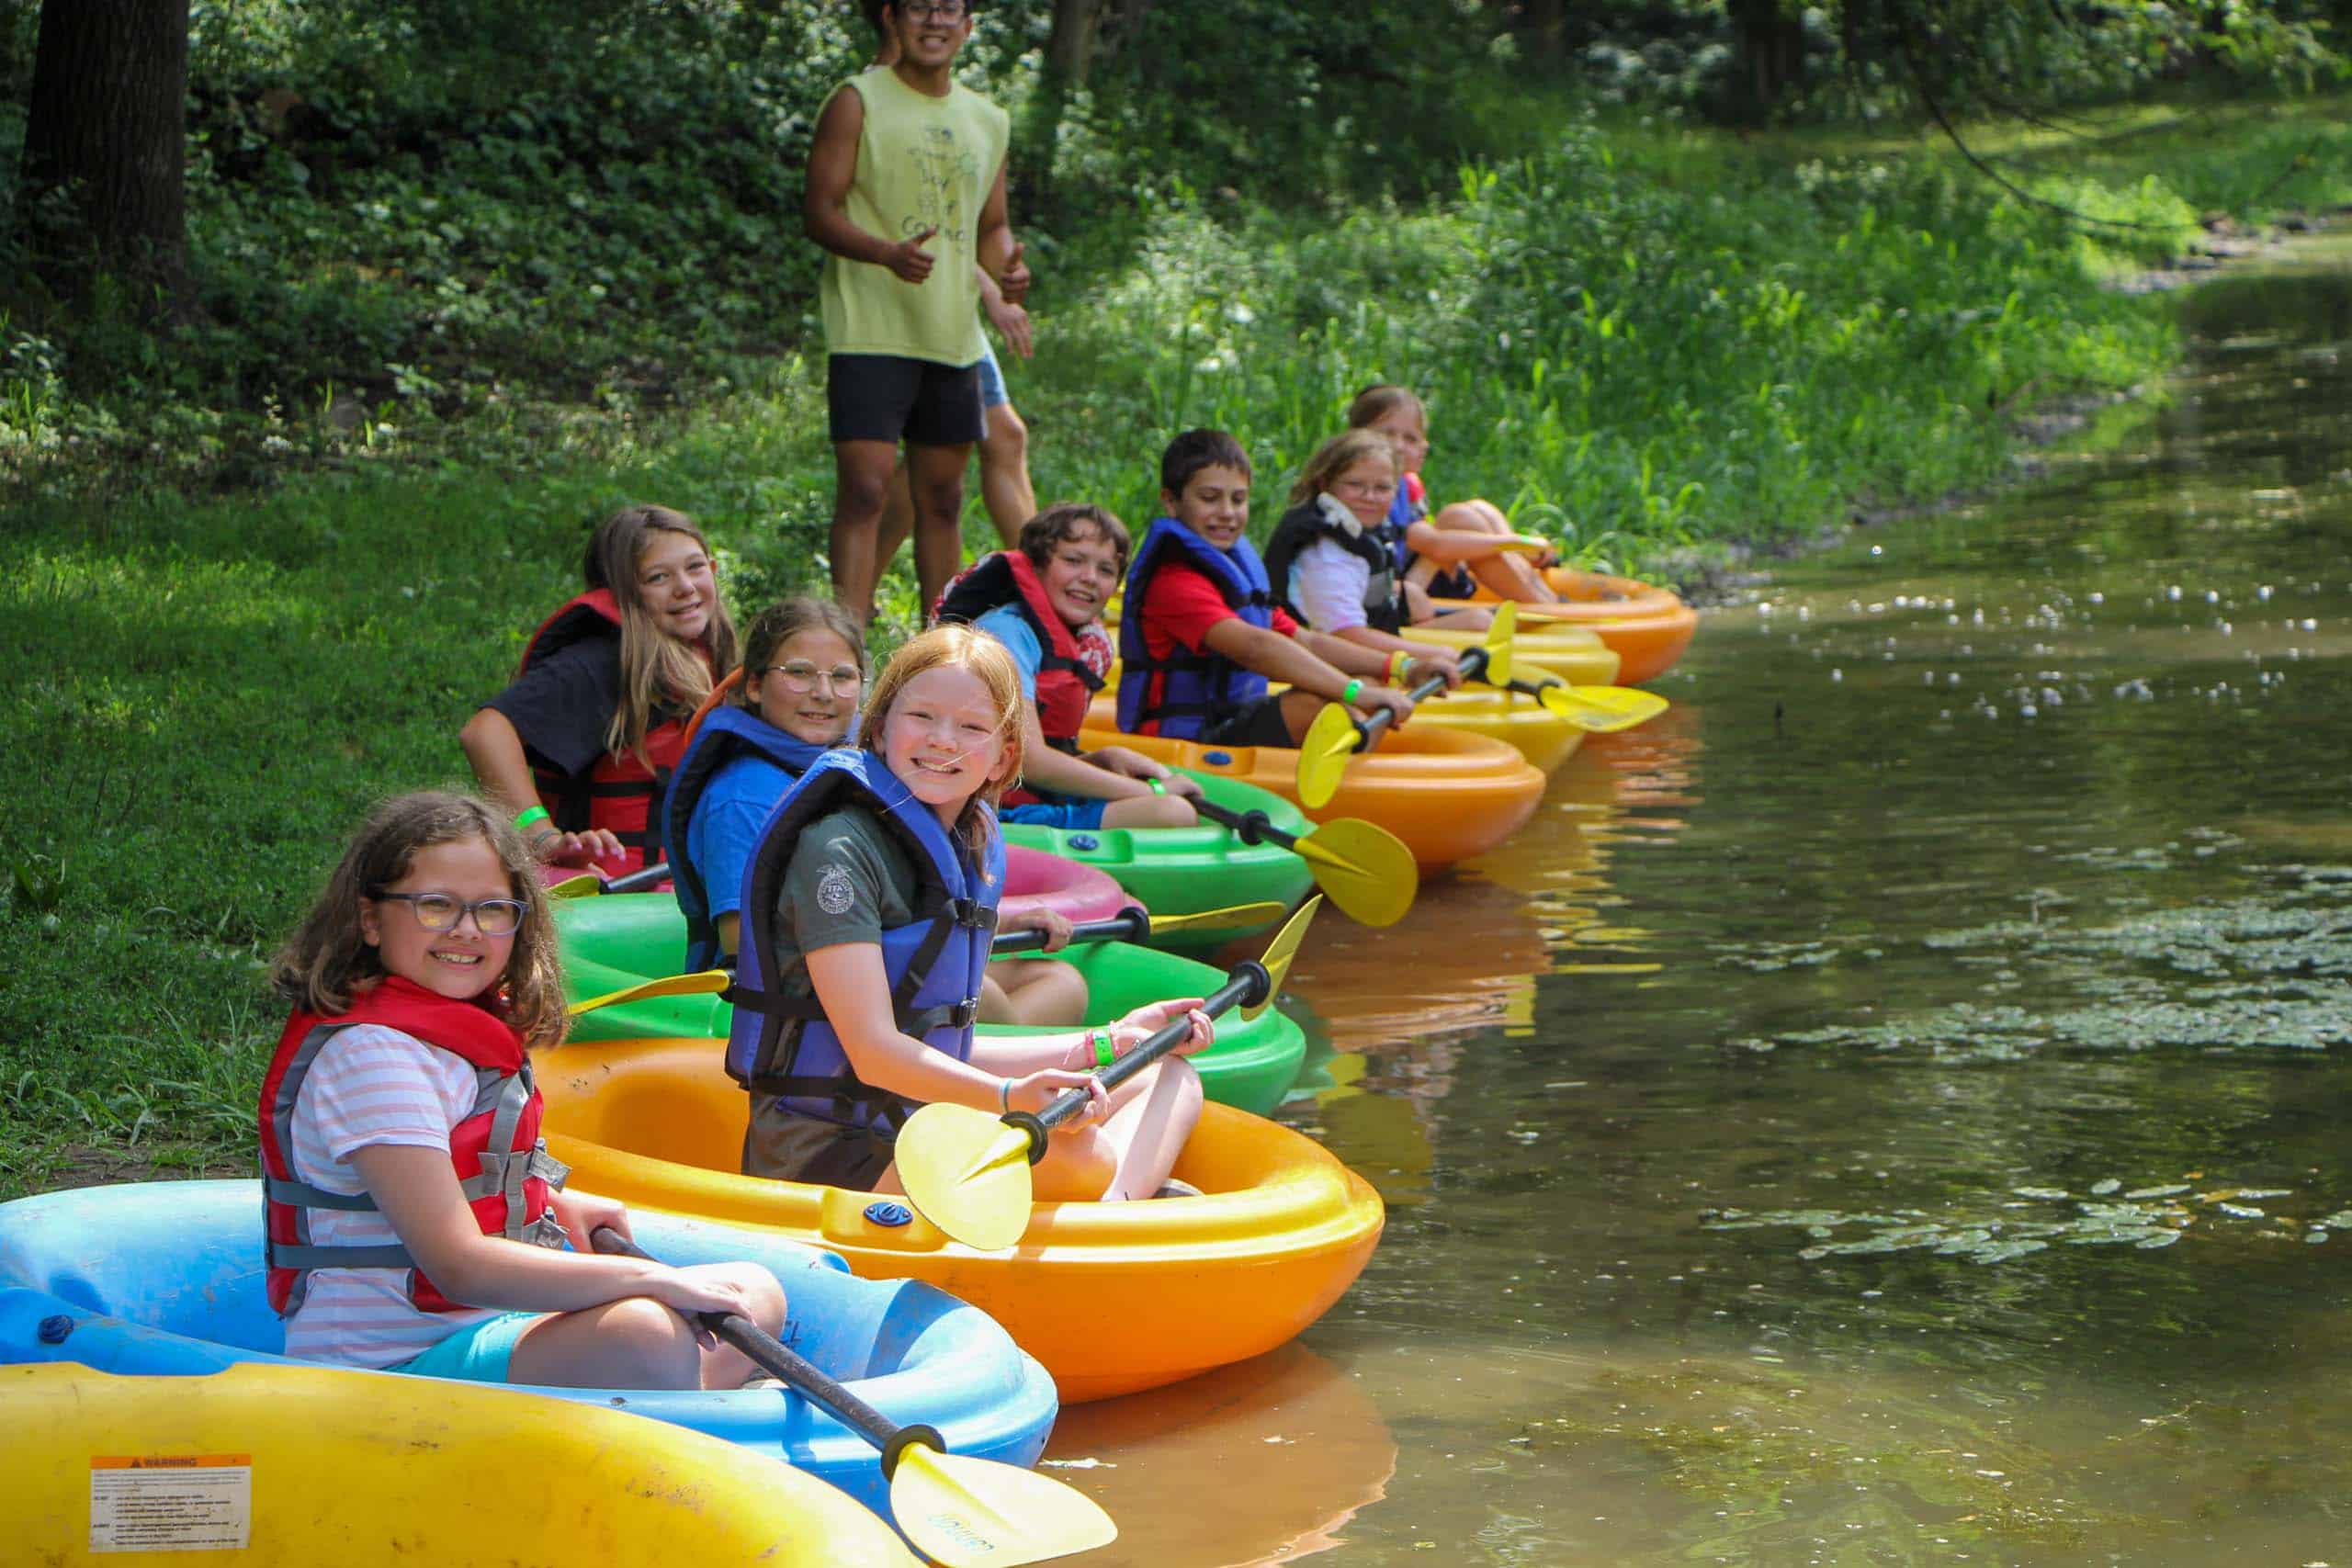 A group of kids at a summer camp in Iowa navigating rafts on a river.